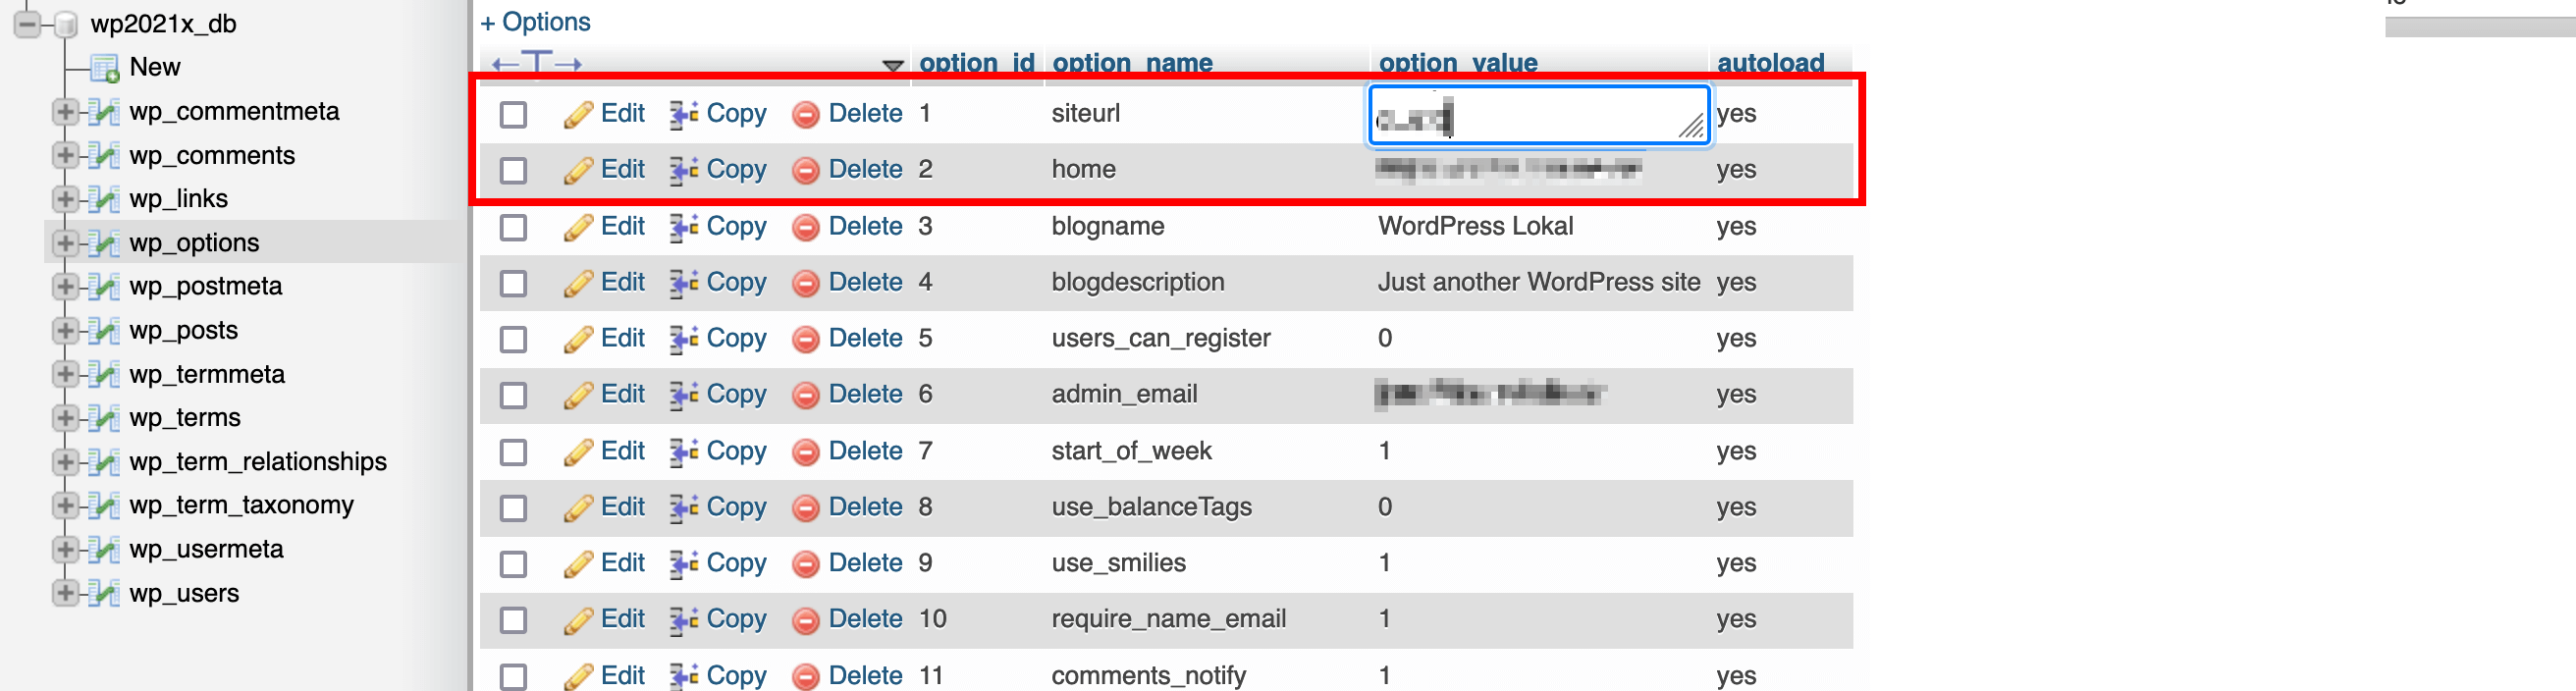 wp_options in the WordPress database